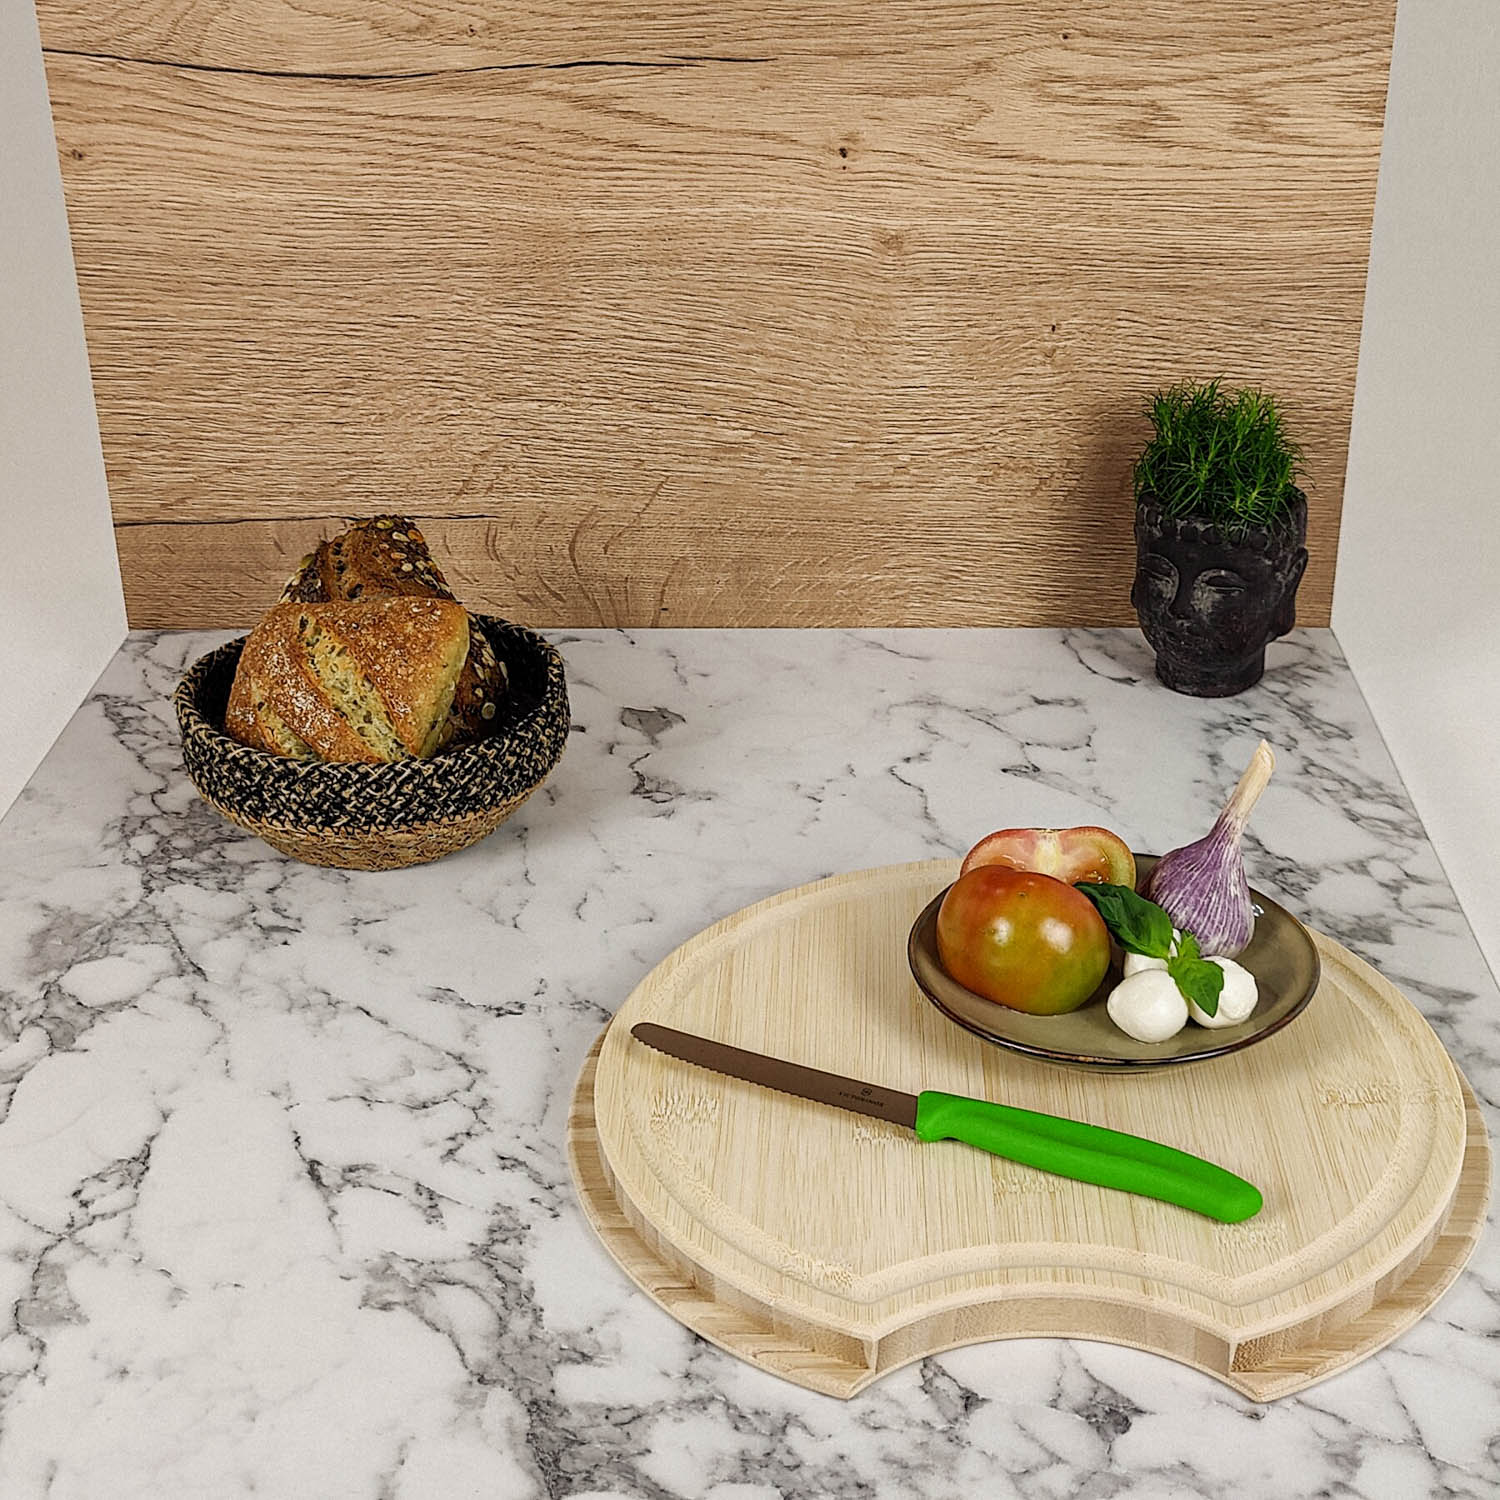 Cutting board with sink cover for LMC models